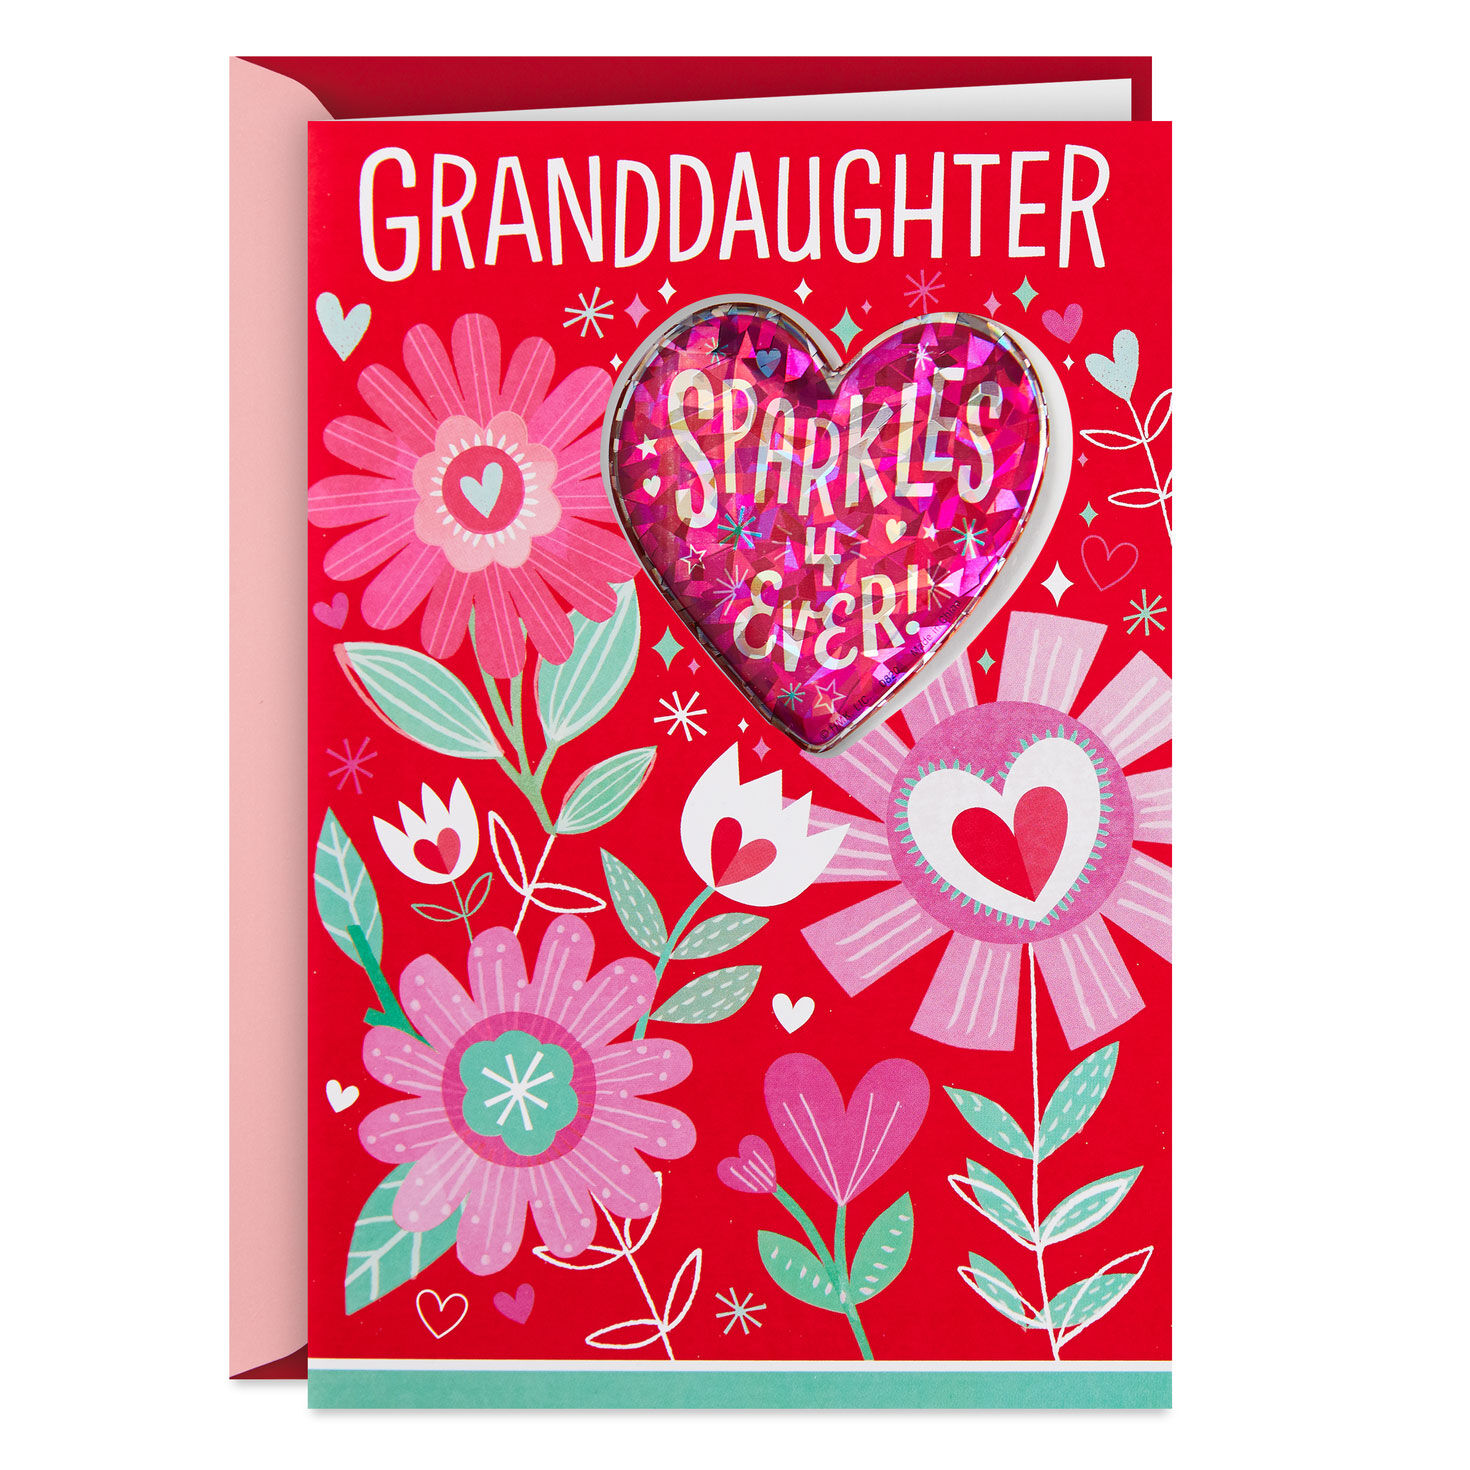 Sparkles Forever Granddaughter Valentine's Day Card With Sticker - Greeting Cards - Hallmark